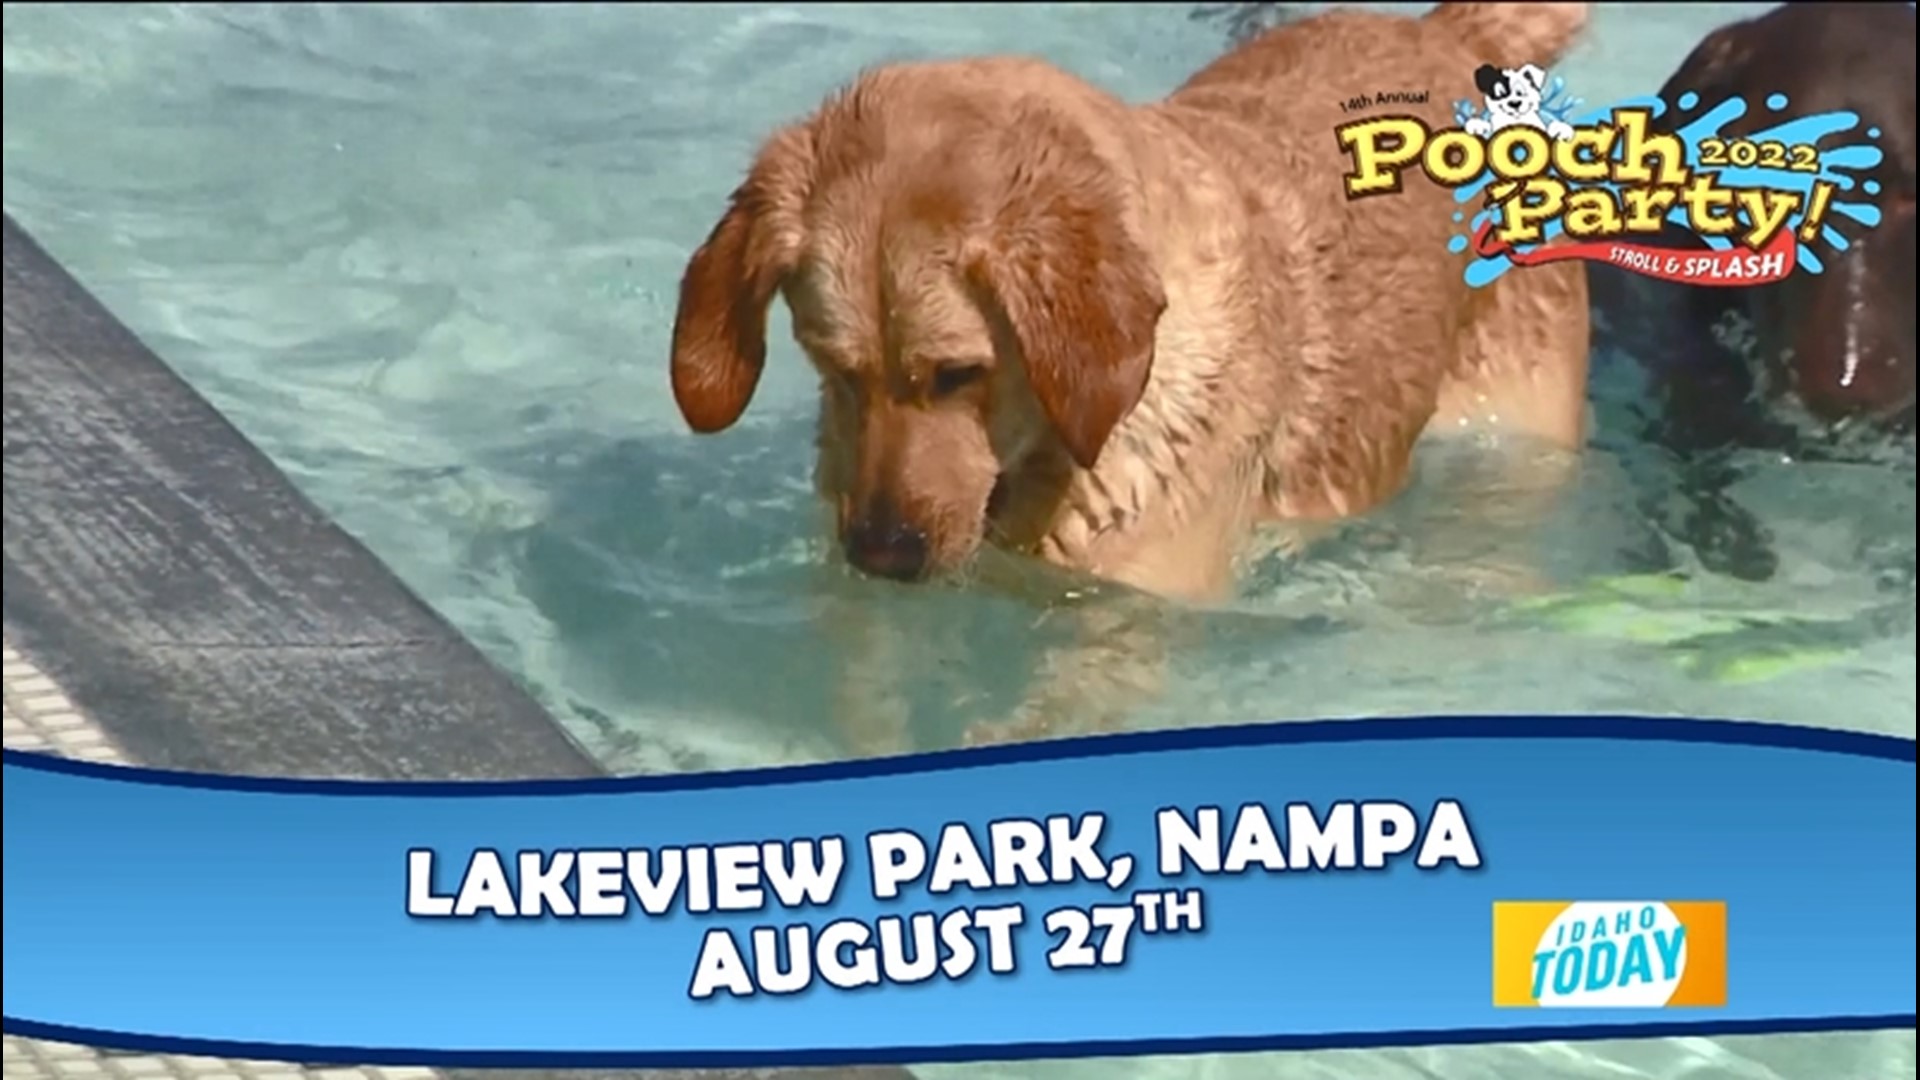 The Pooch Party Stroll & Splash is August 27th at Lakeview Park in Nampa. Contests, raffles, and pet-friendly booths.